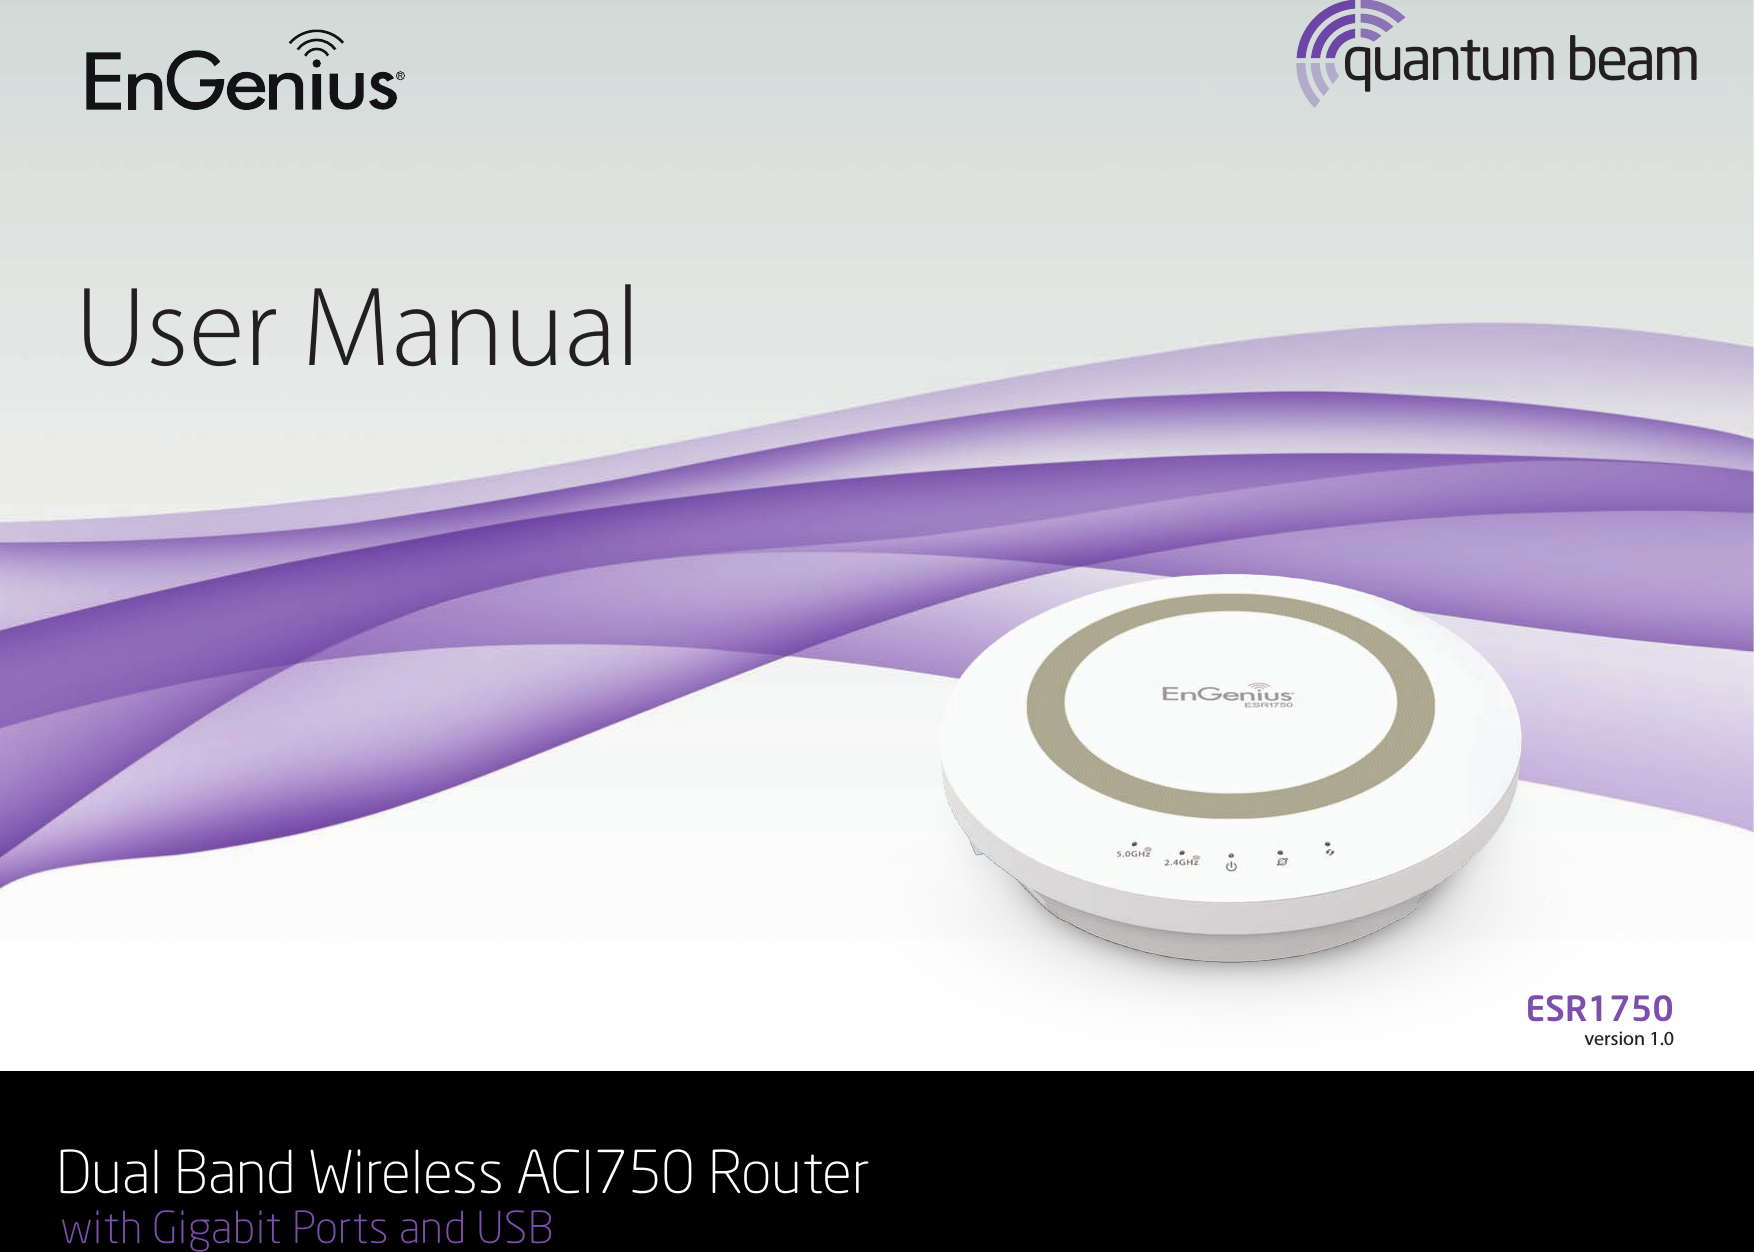 1quantum beamUser ManualDual Band Wireless ACI750 Router with Gigabit Ports and USBESR1750version 1.0